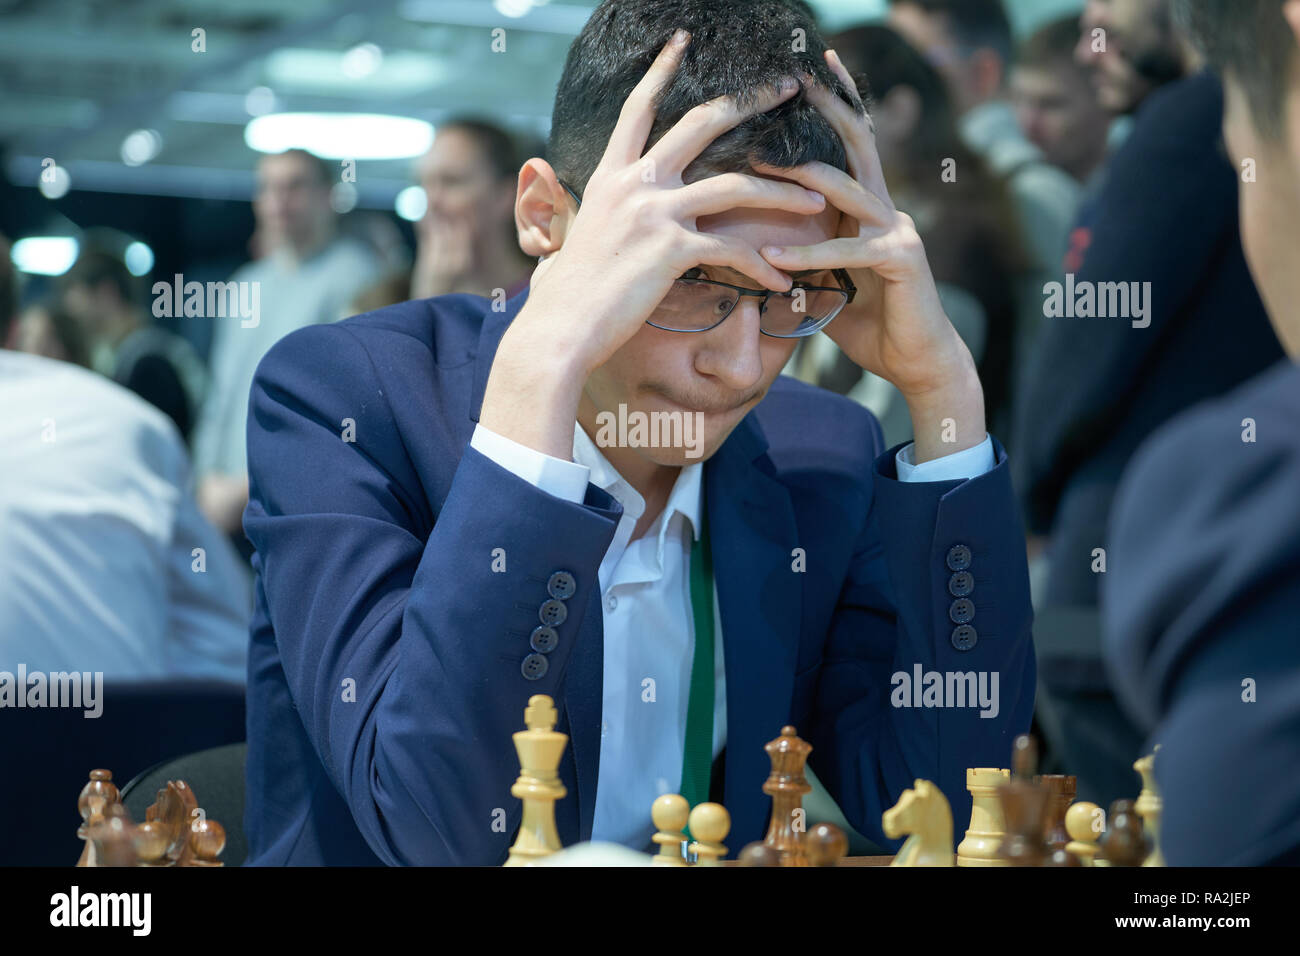 2700chess on X: Meet 16 y/o Alireza Firouzja 🇮🇷 in the 2700 club! He  scored 11.5/13 and TPR of 2800 at the Turkish League @TurkishChess to  become the second youngest chess player